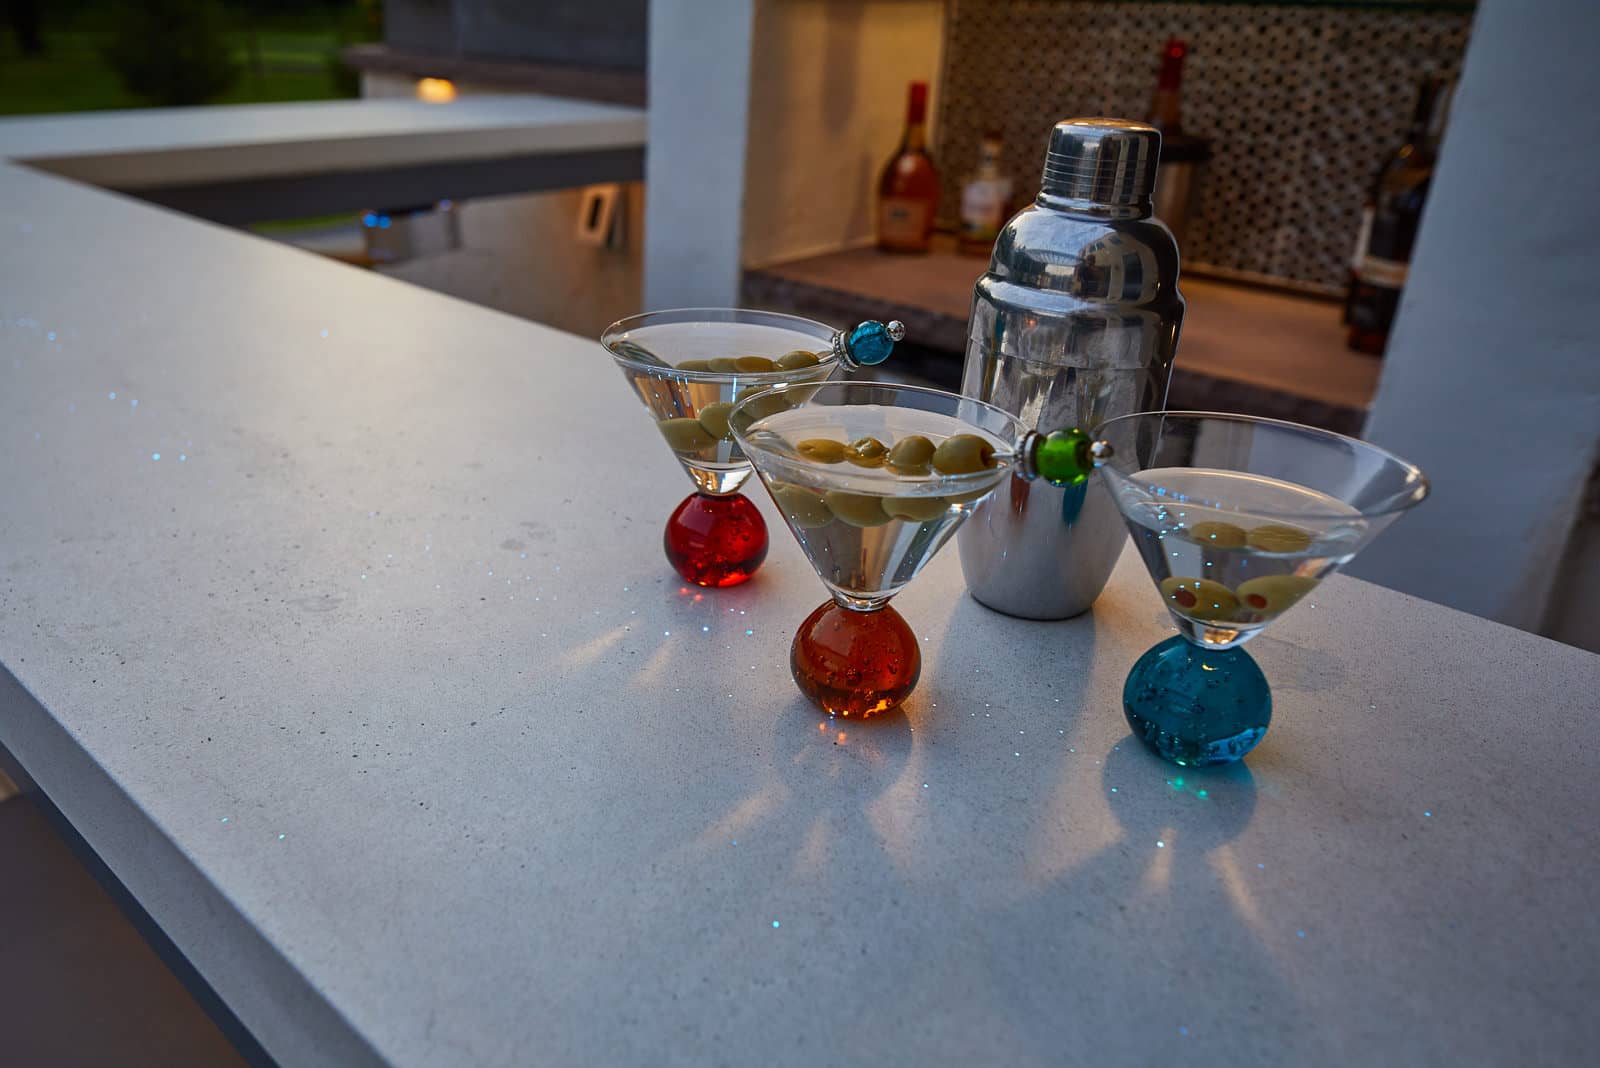 The bar area is complete with a 2” thick custom concrete countertop adorned with thousands of hand placed fiber optics throughout, flowing like a constellation!